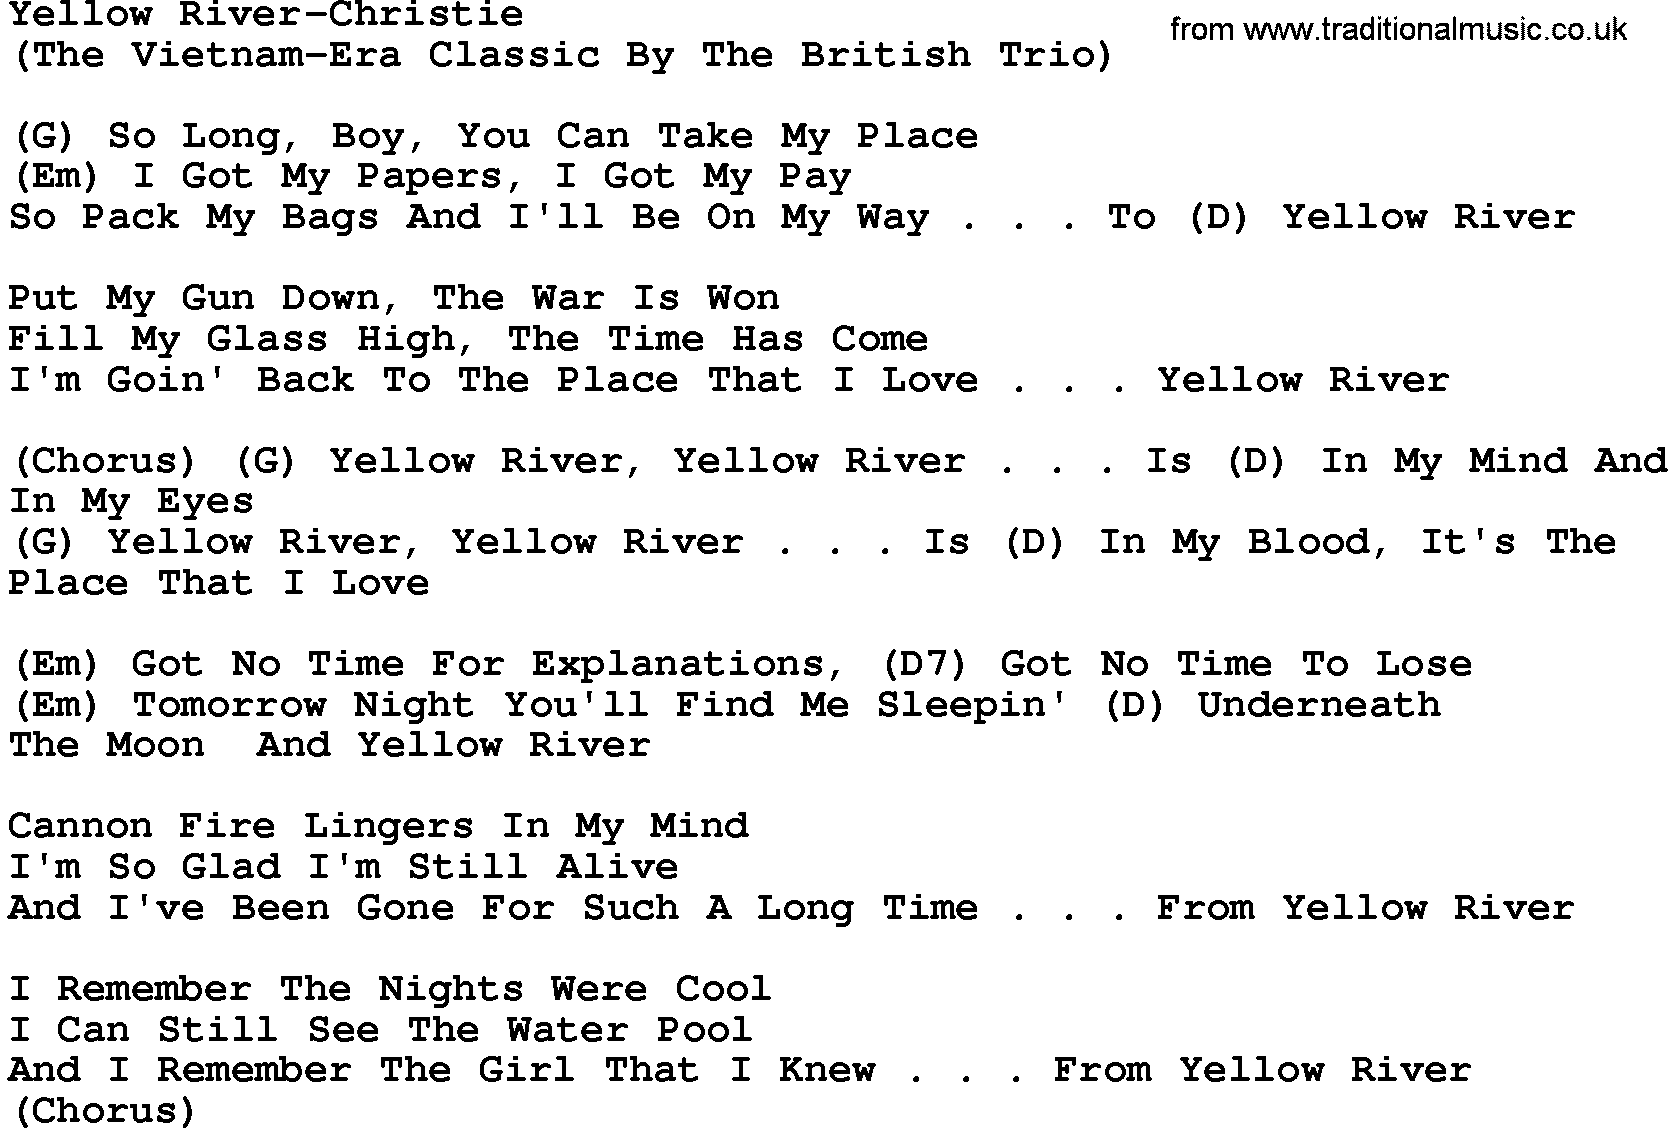 Country music song: Yellow River-Christie lyrics and chords